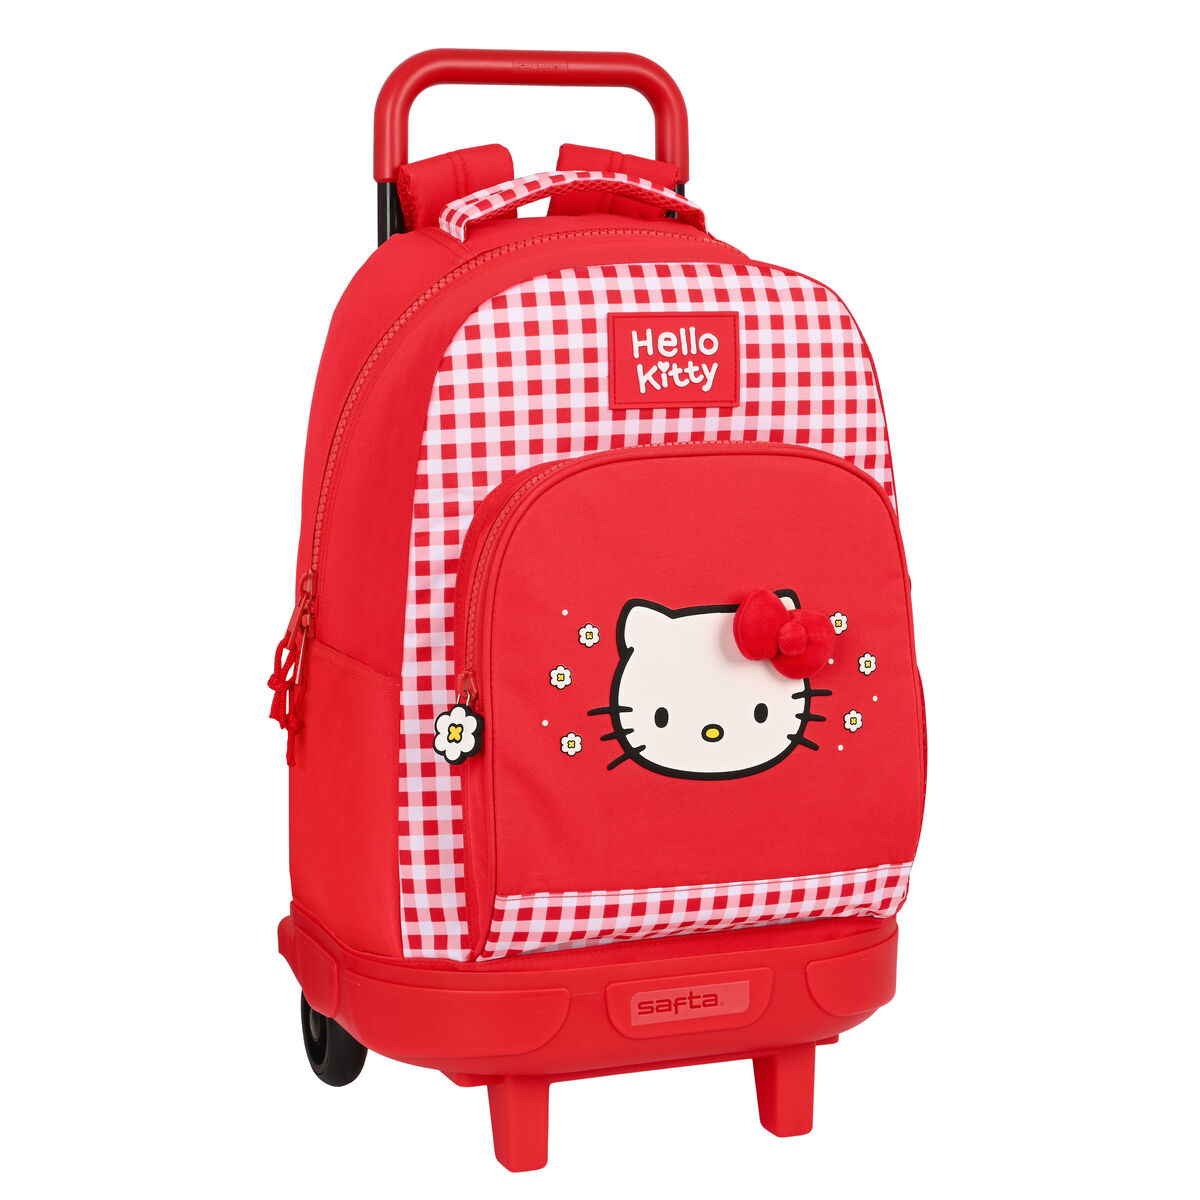 Cartable à roulettes Hello Kitty Spring Rouge (33 x 45 x 22 cm)